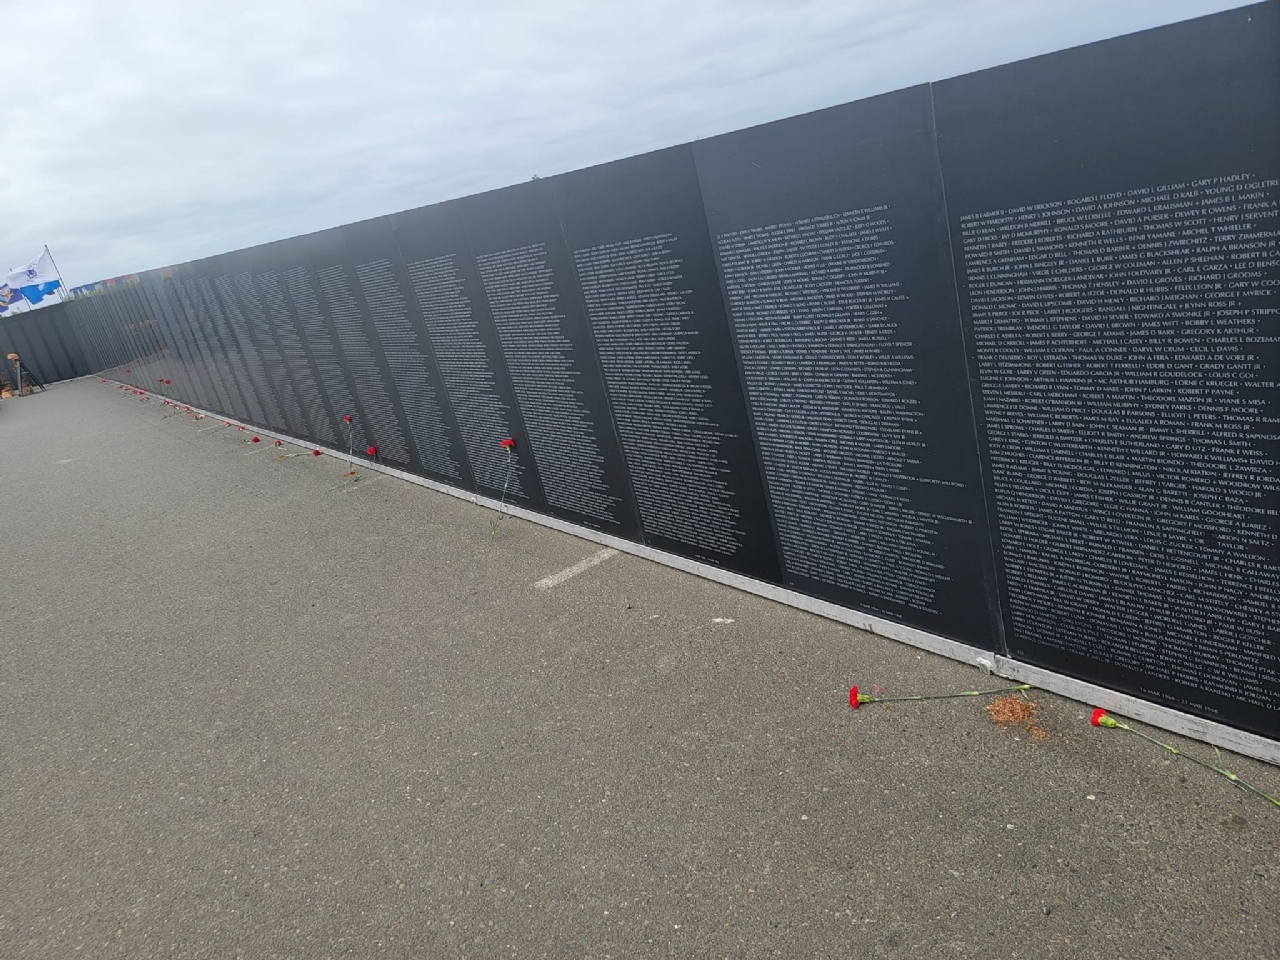 This is the traveling Cost of Freedom wall at Ocean Shores, Washington.